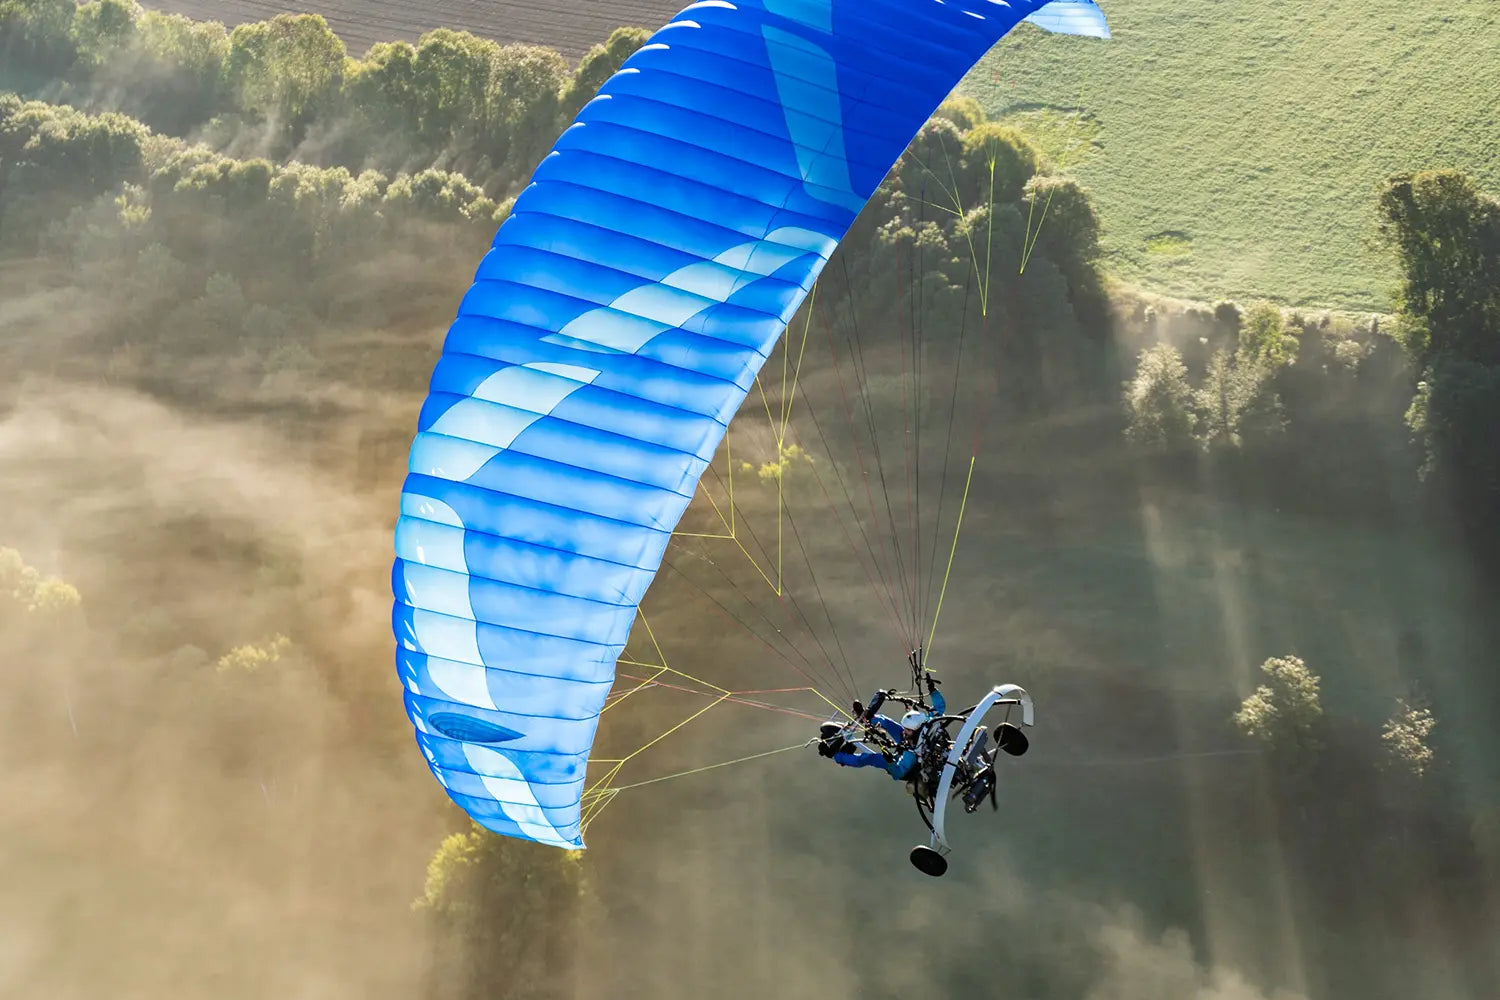 Where to Buy Paragliding Gear in Australia